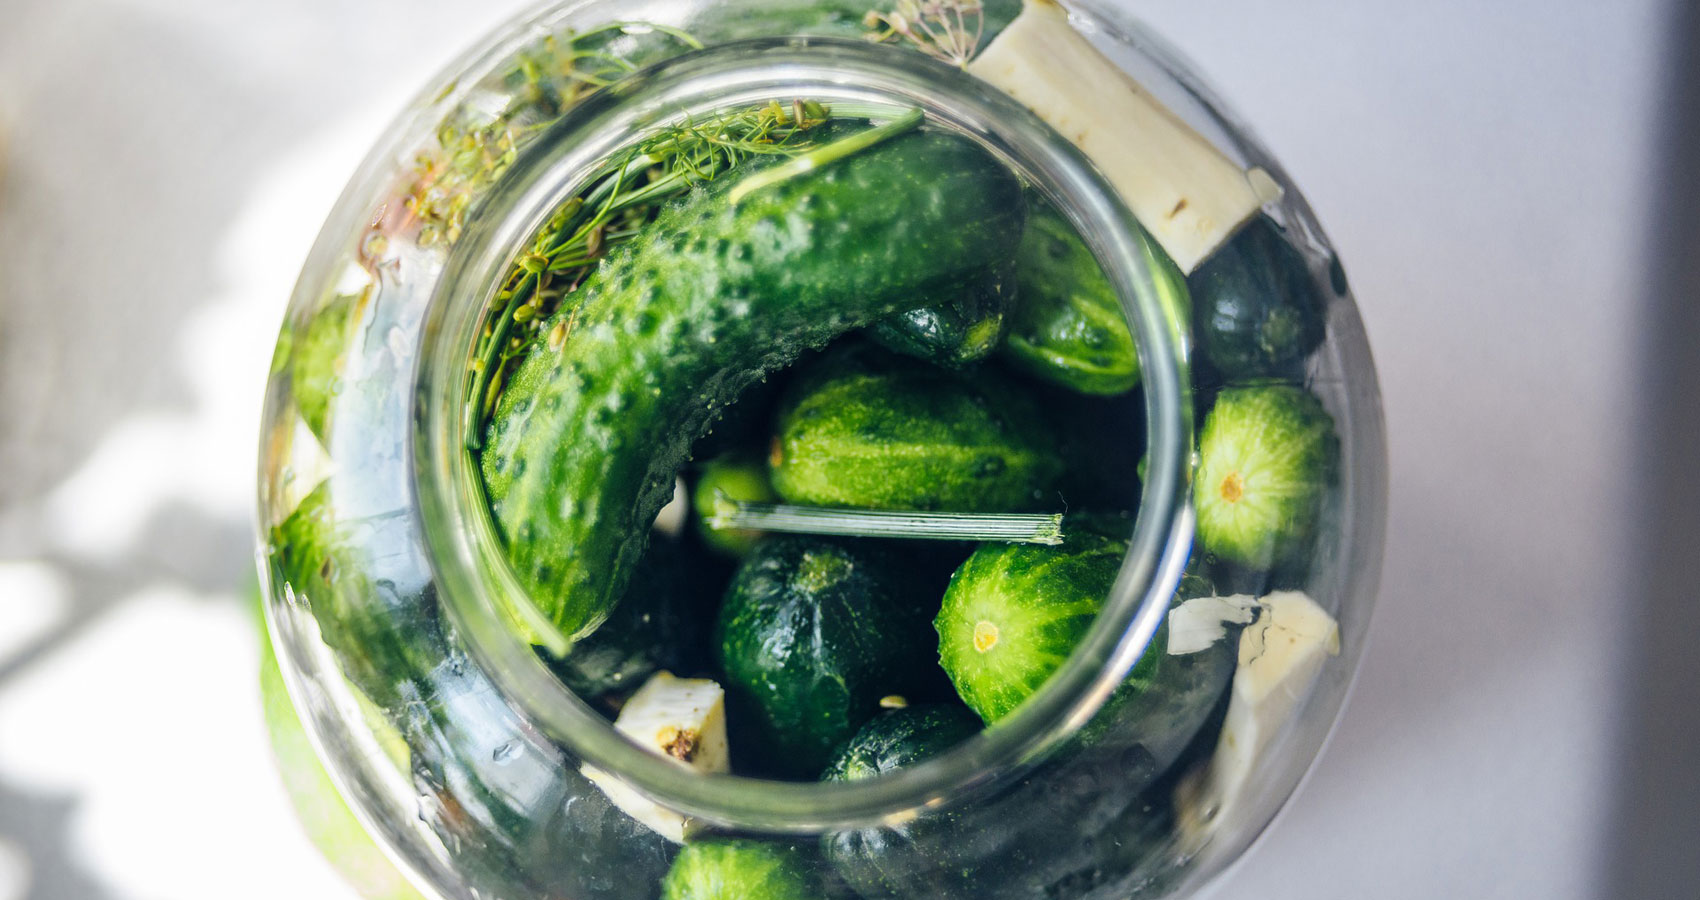 Clyde and The Pickle Jar, short story by Steve Carr at Spillwords.com